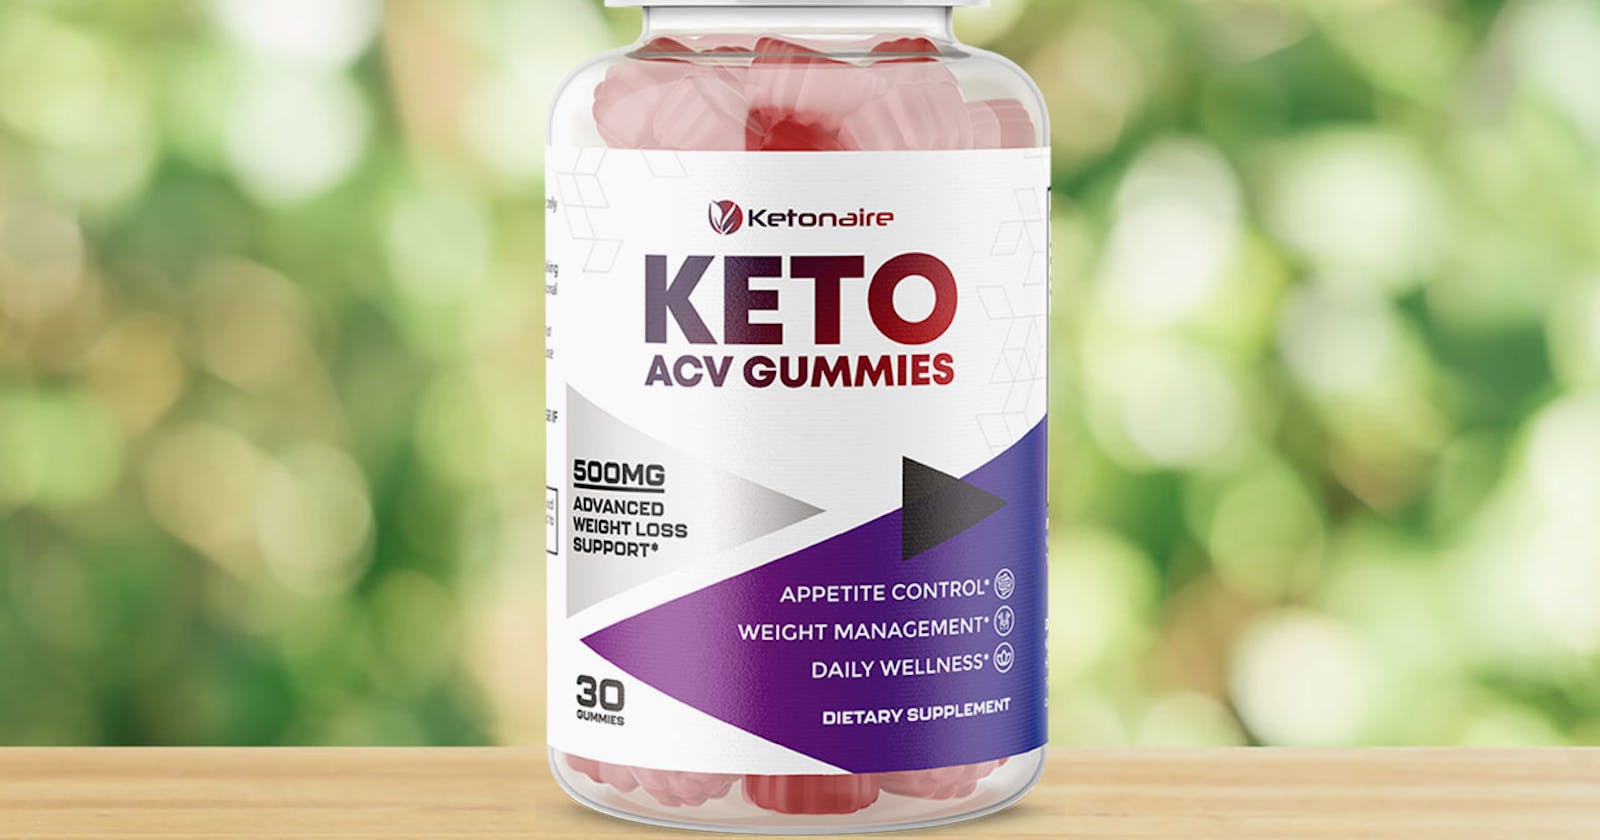 ACV Gummies for Weight Loss and Wellness